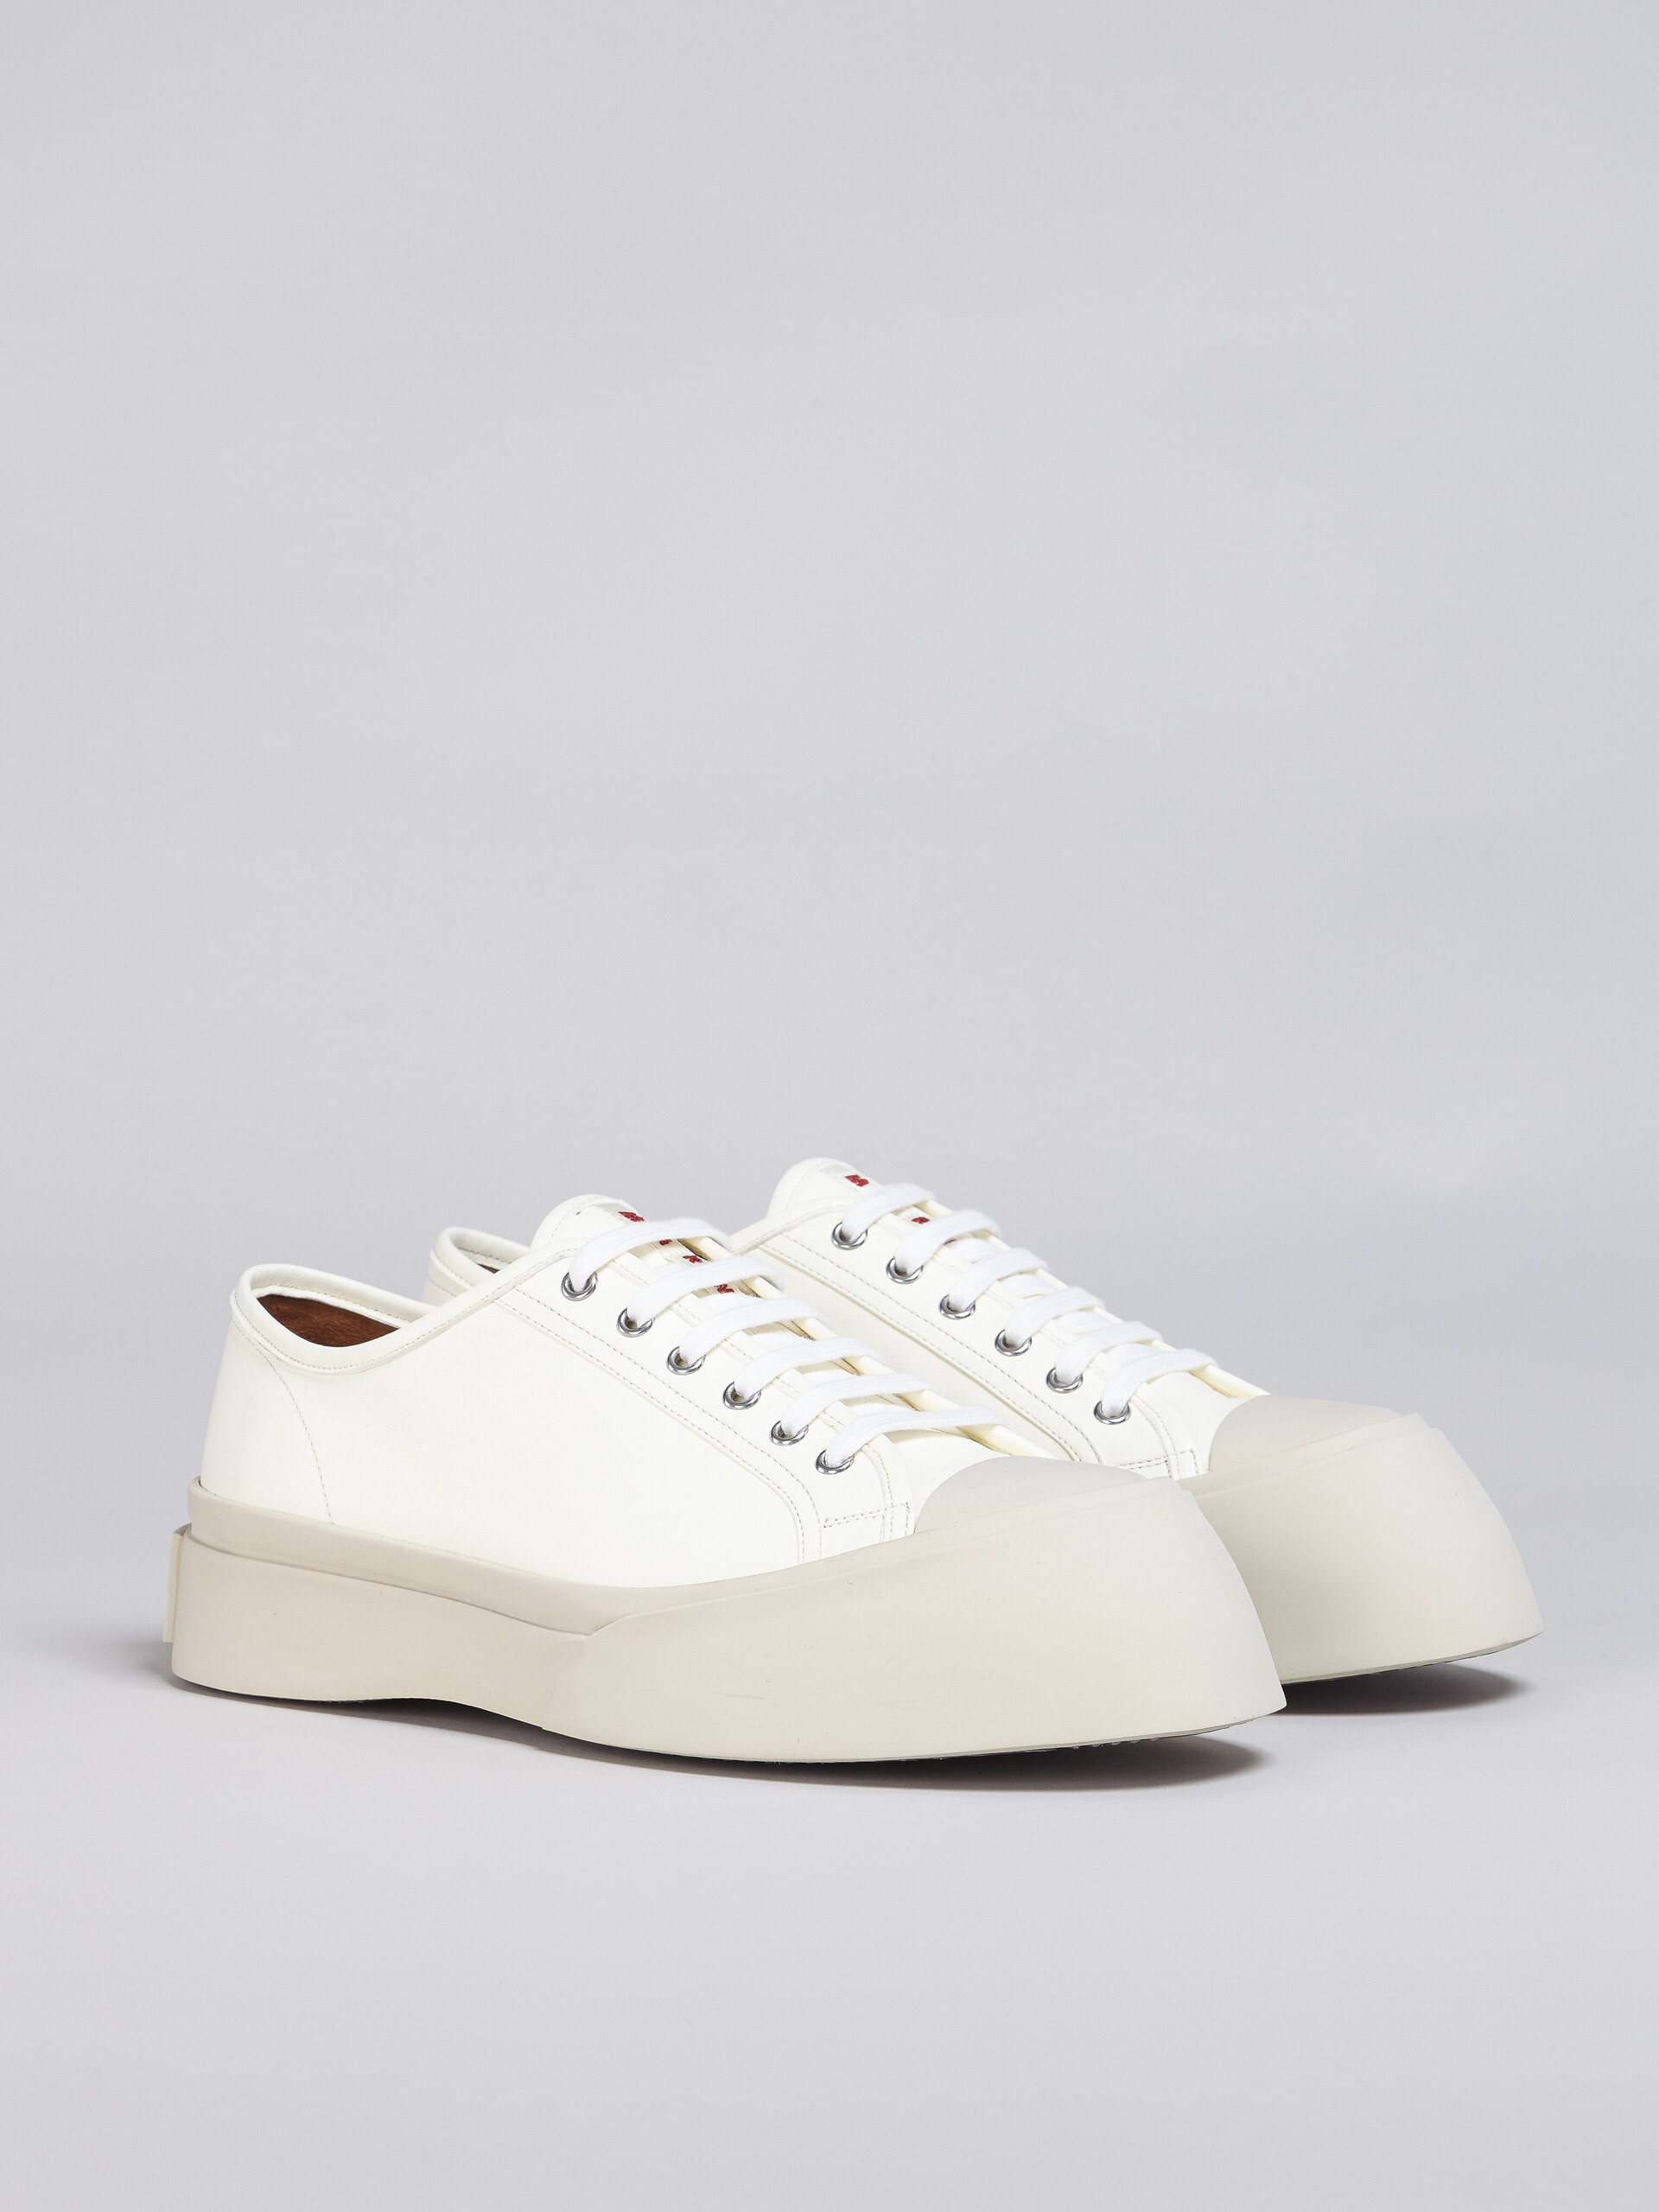 White soft calf leather PABLO sneaker - Sneakers - Image 2